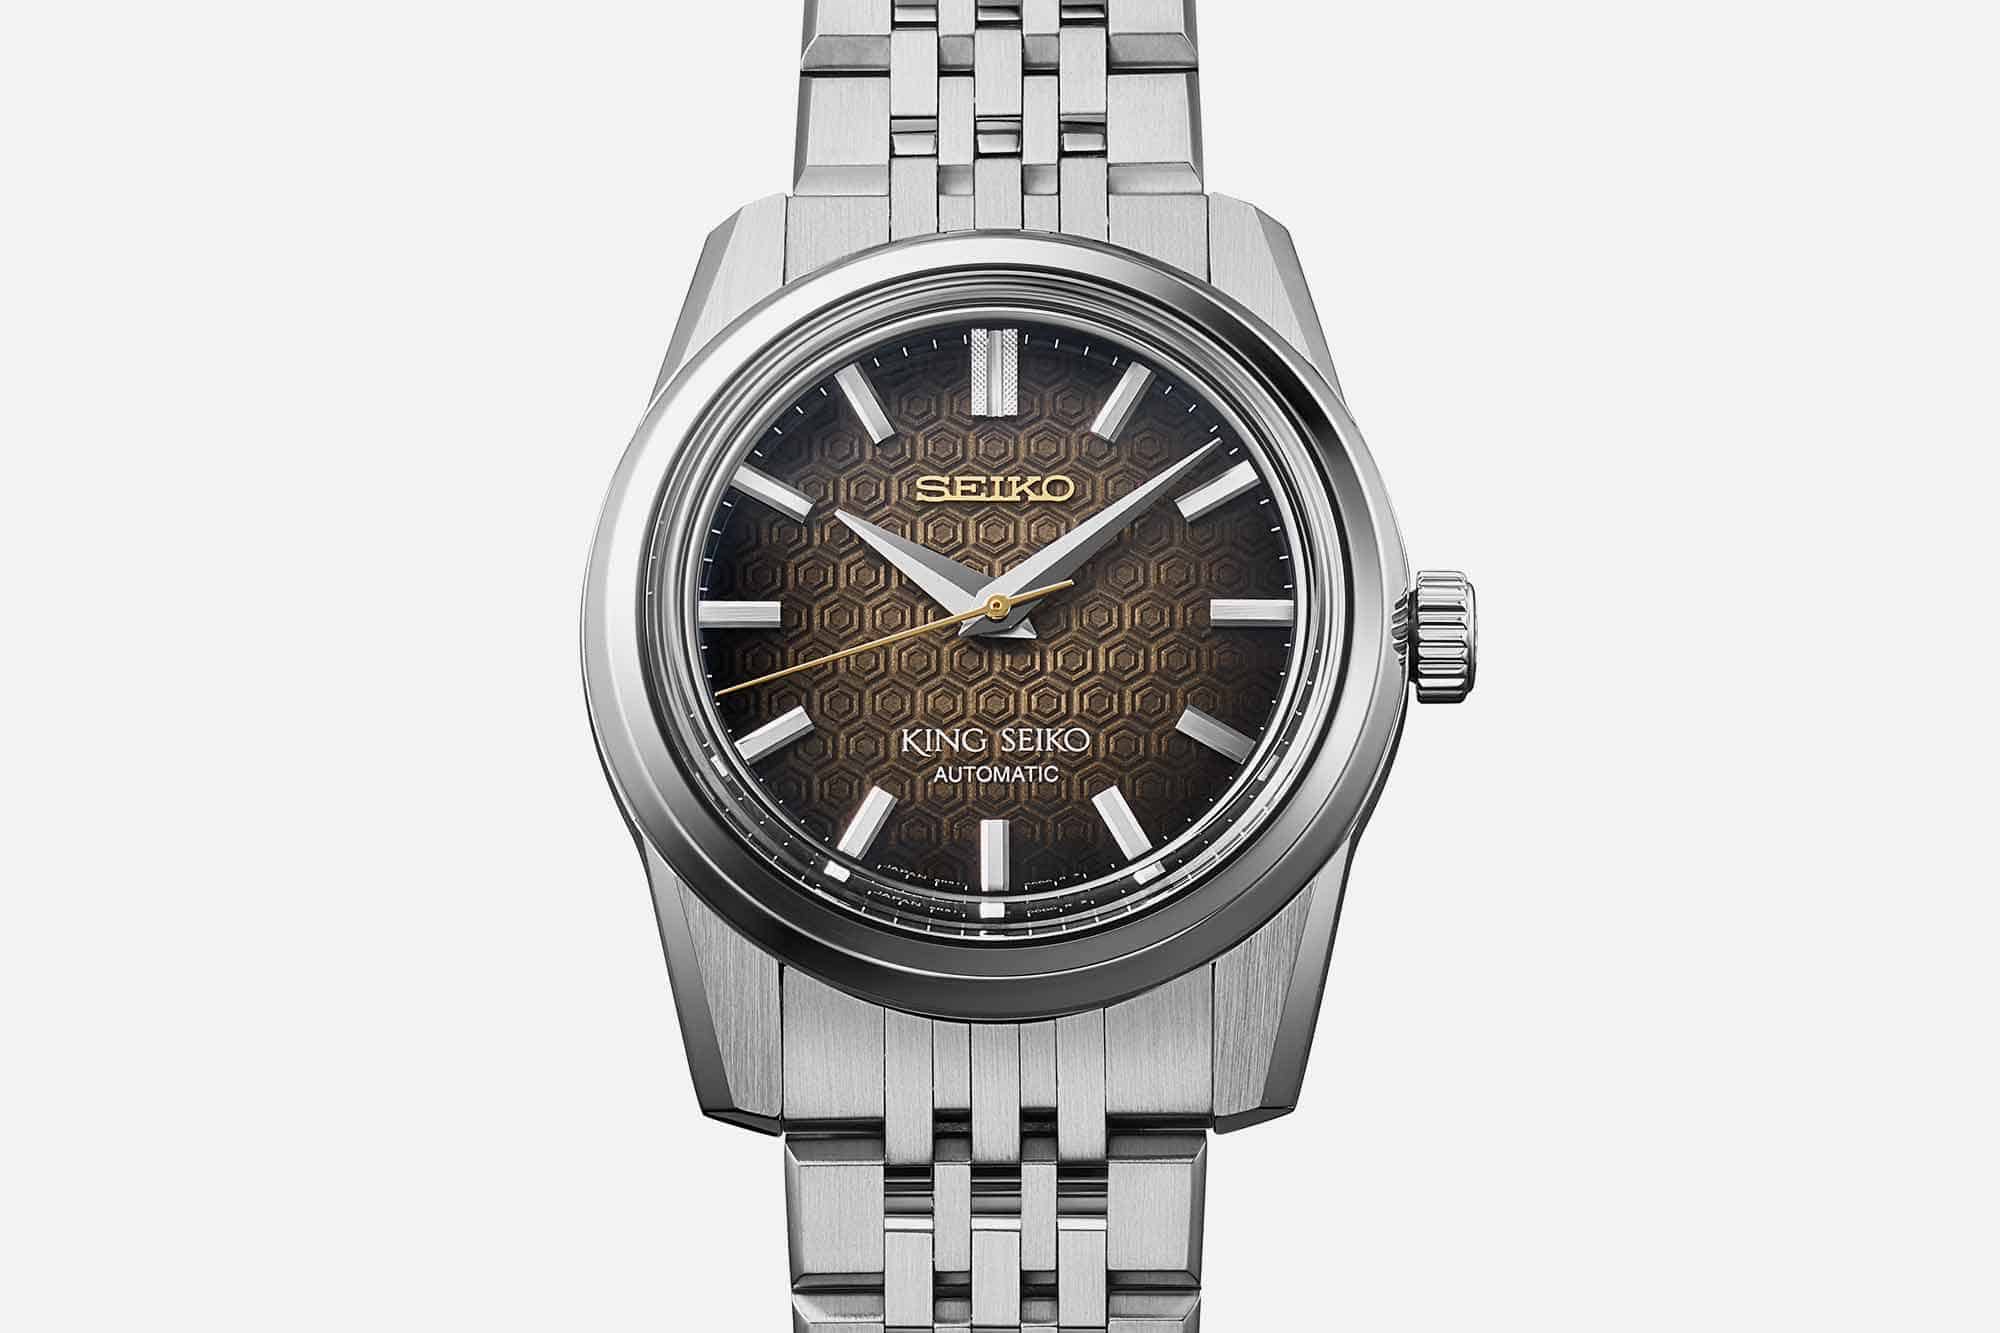 A New Collection of King Seikos Make their Debut Just in Time for a Big  Seiko Anniversary - Worn & Wound